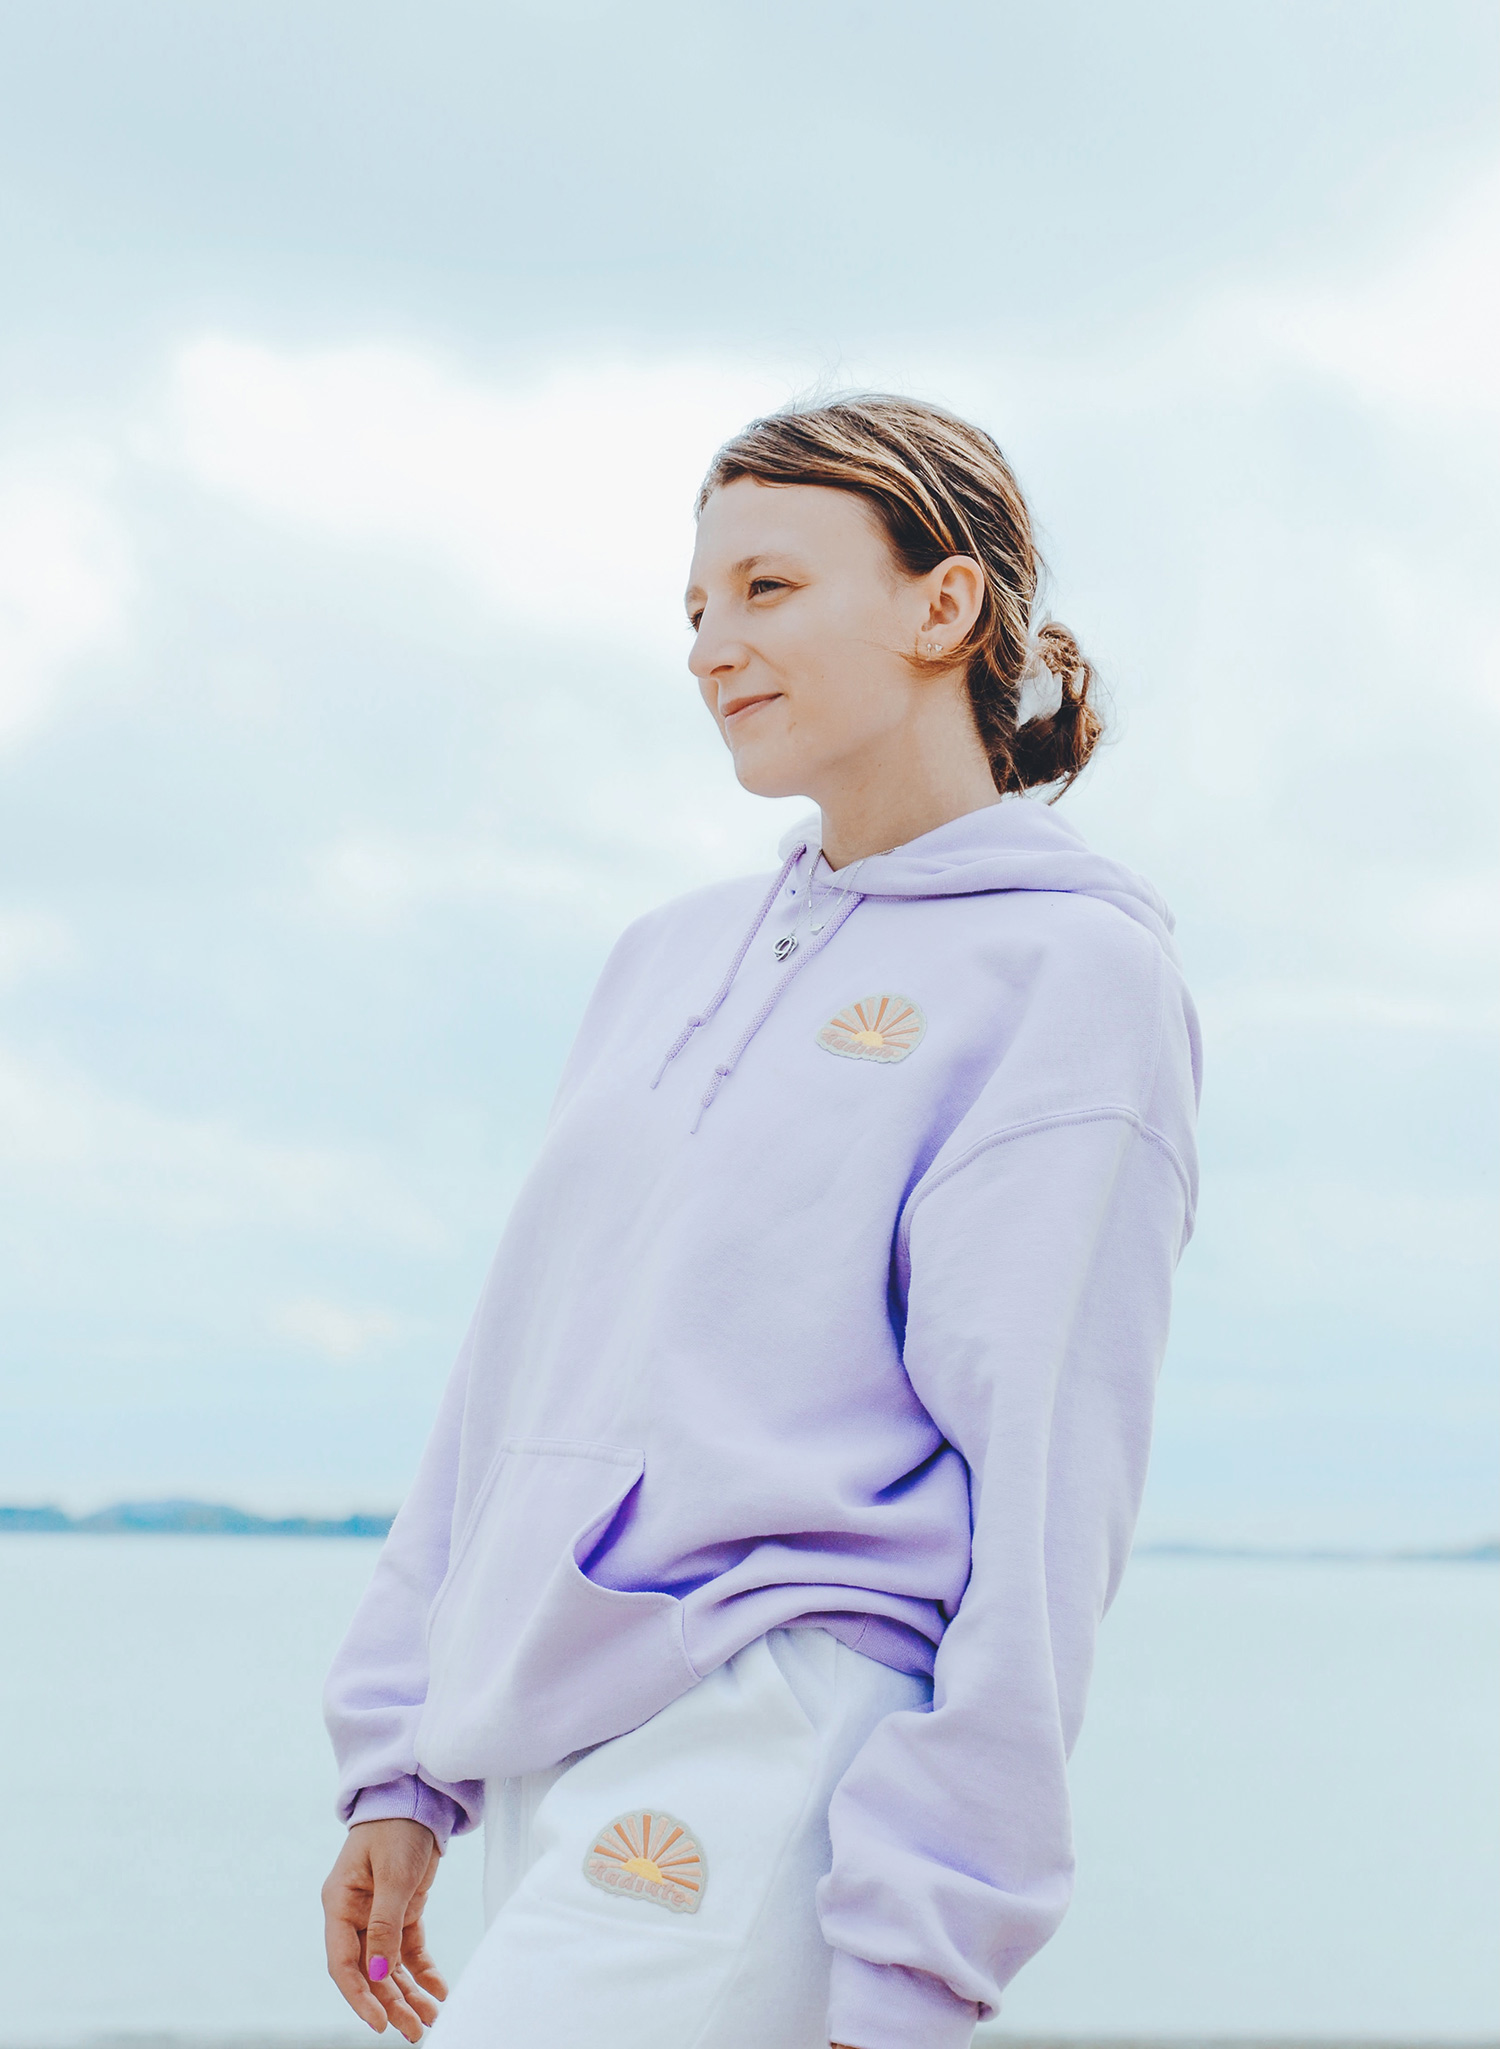 Photo of Kate Silvestri (Questrom’23) modeling the light purple Lotus hoodie, one of the pieces in her Radiate clothing line. Behind her, a gray sky and body of water are seen.